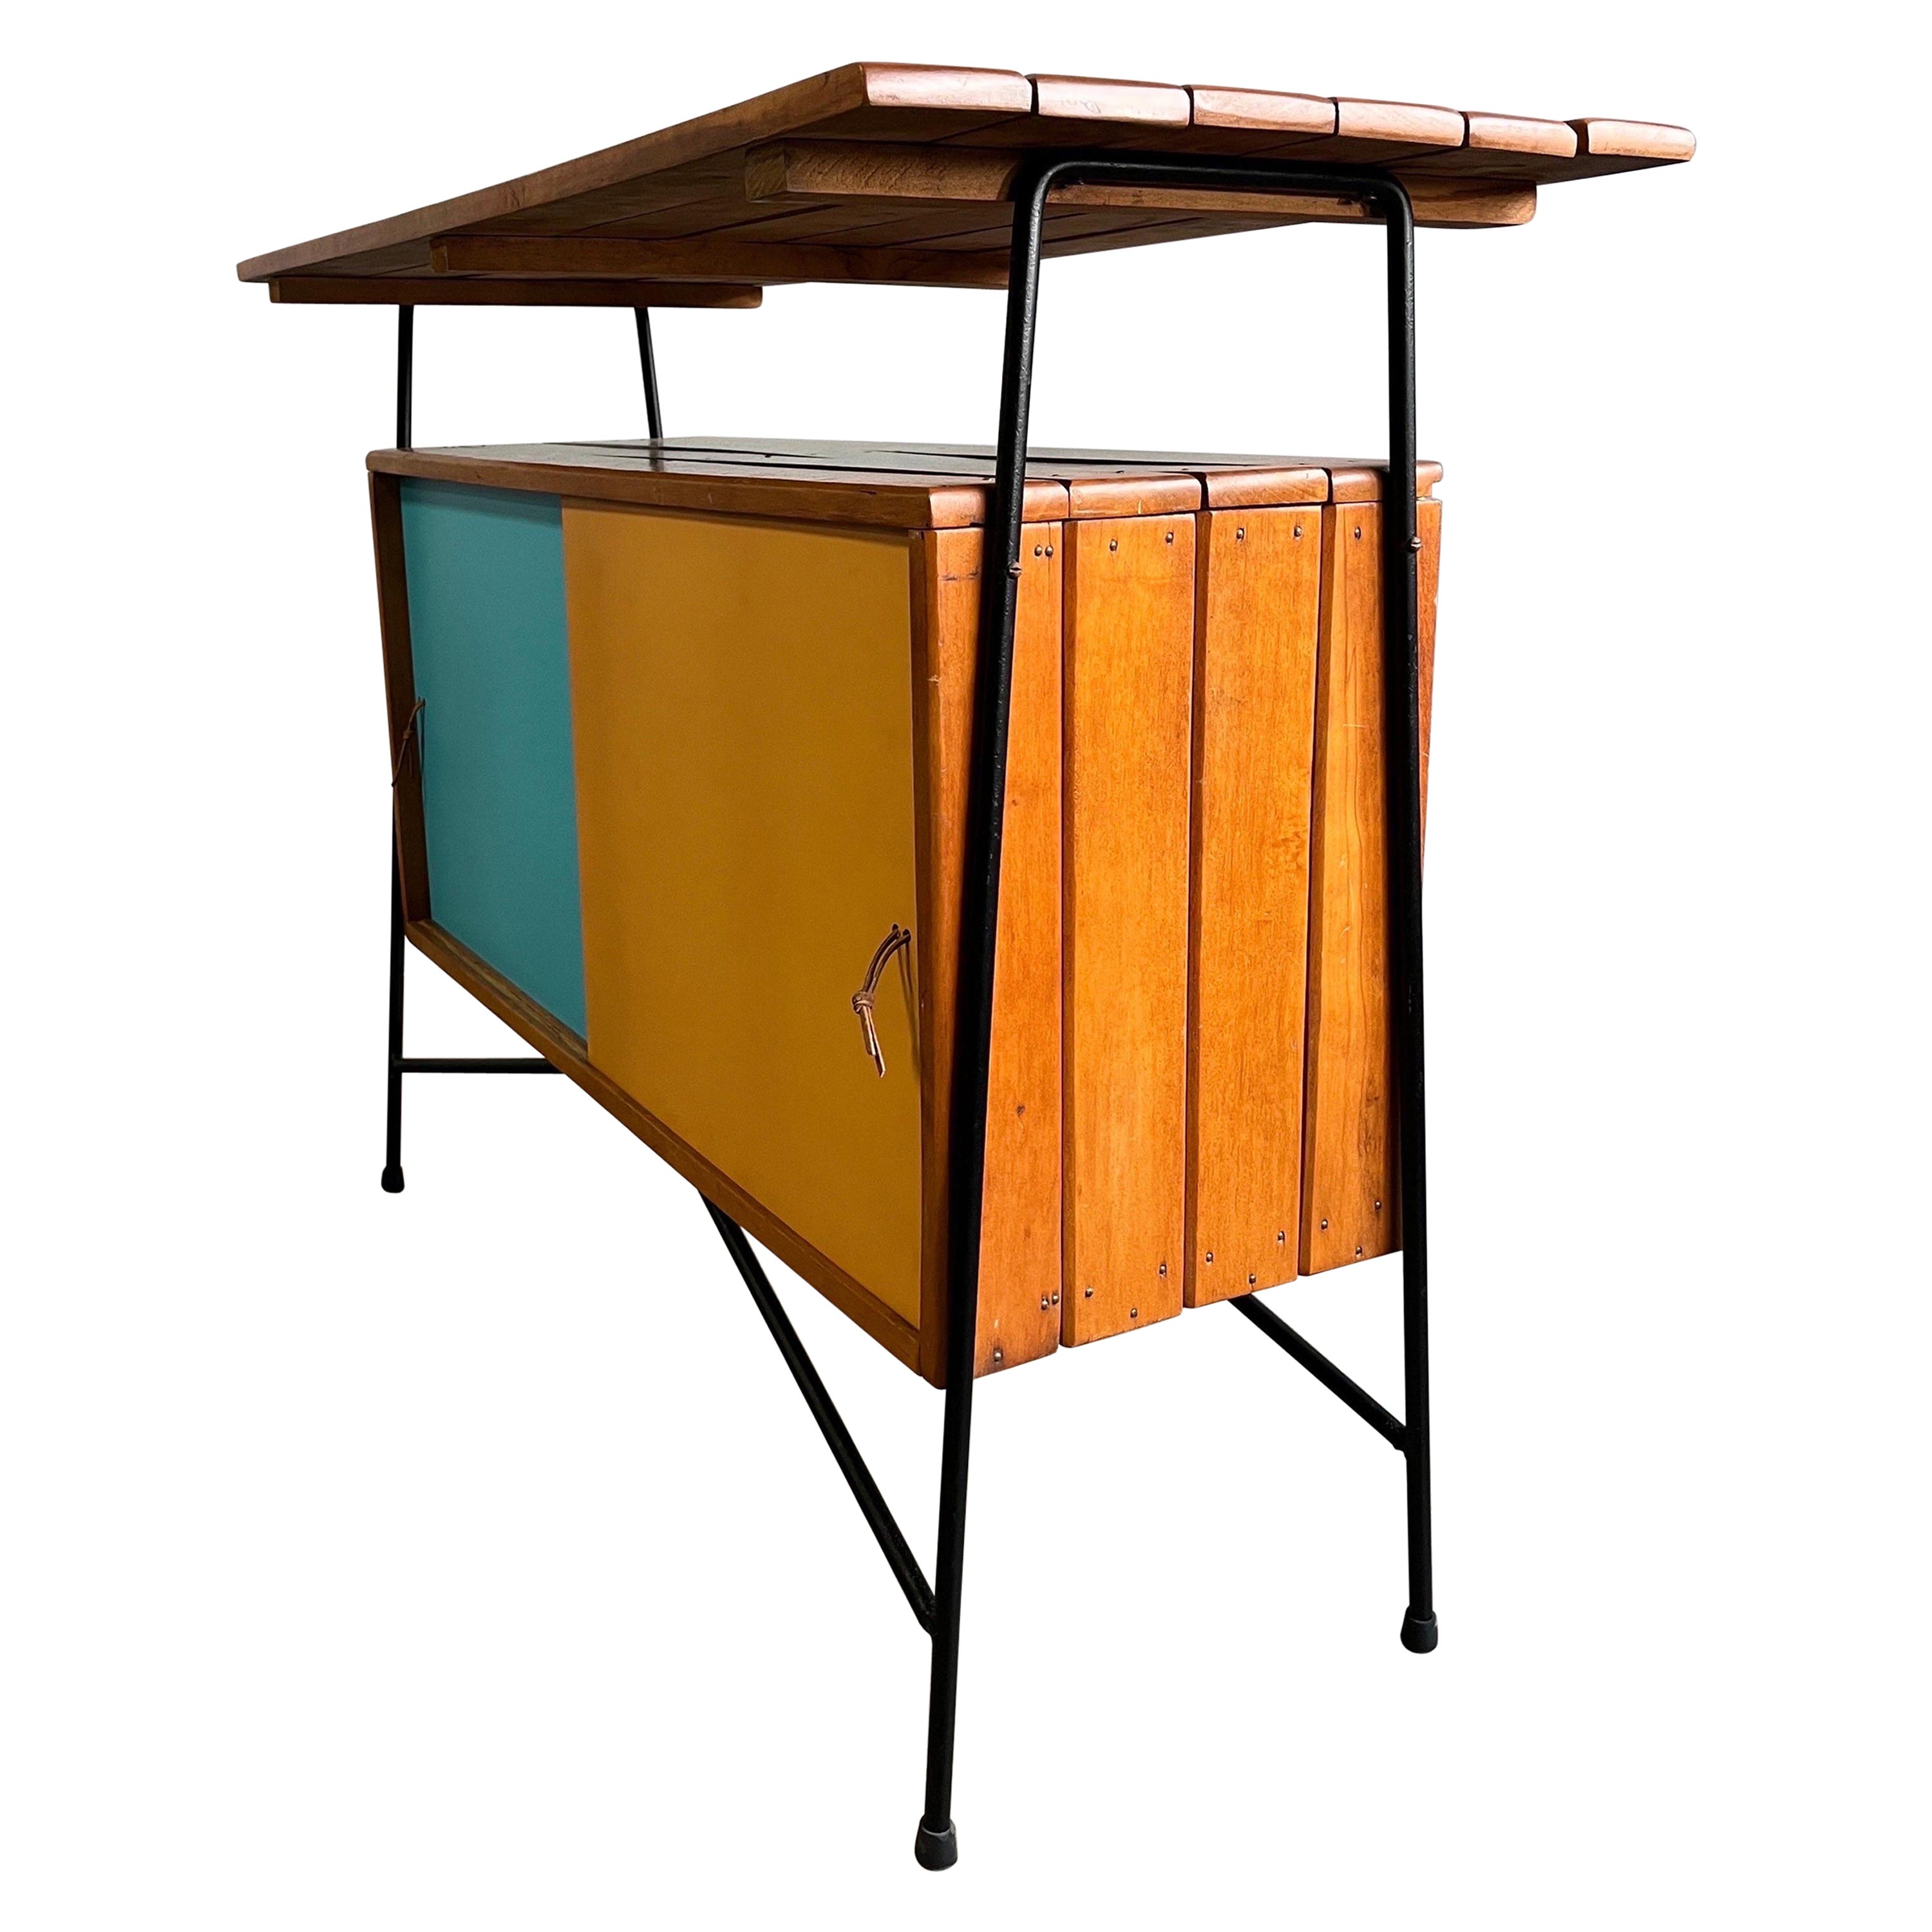 Mid-century Arthur Umanoff credenza, cabinet, or bar featuring slat wood top and lower sliding door cabinet on iron frame. Playful colored doors with sharp and dynamic lines make this piece exceptional. Can be placed against the wall as a sideboard